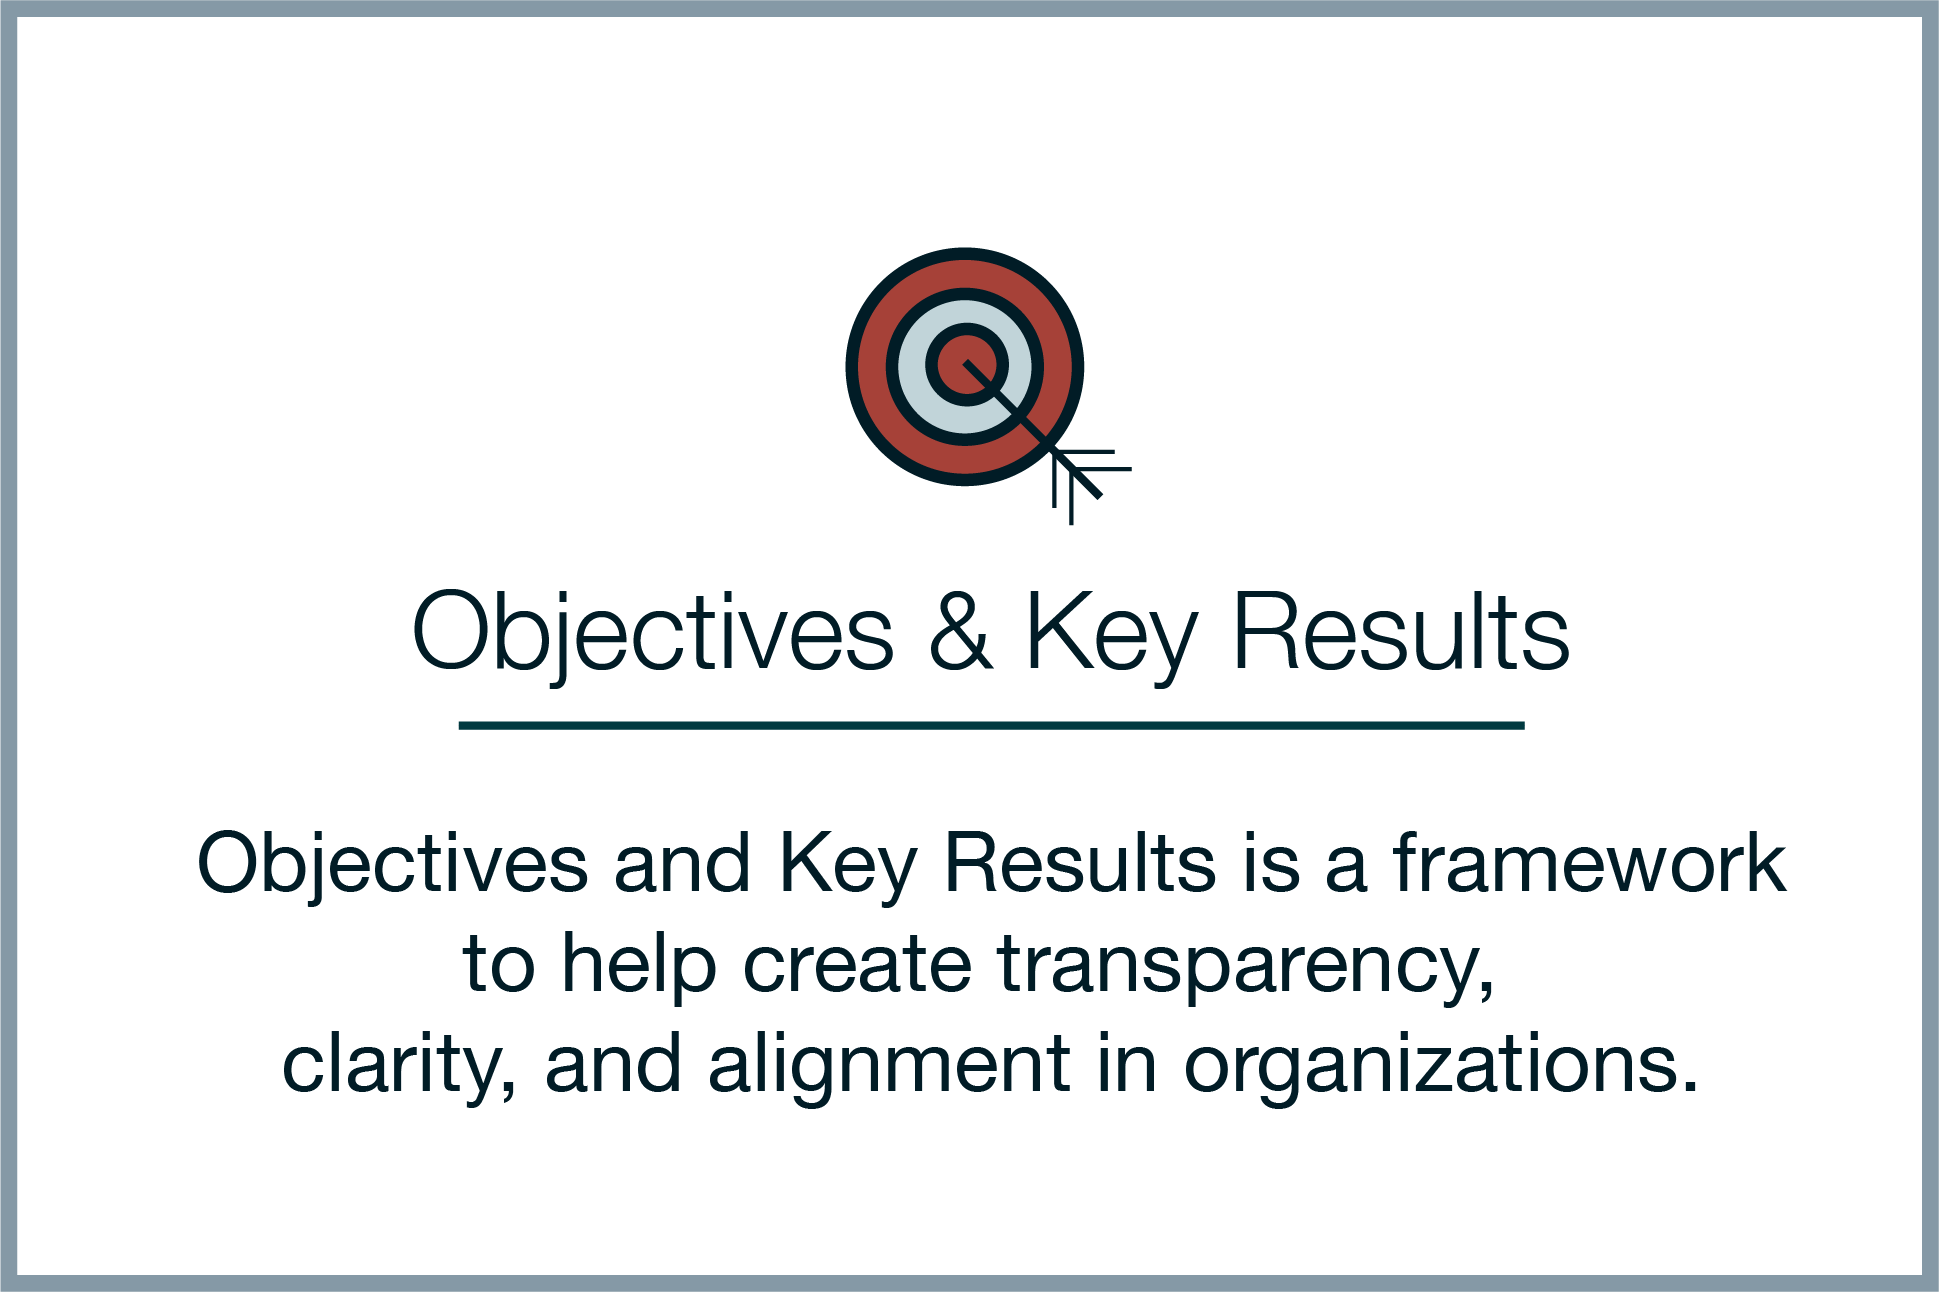 Objectives and key results is a framework to help create transparency, clarity, and alignment in orgnaizations.